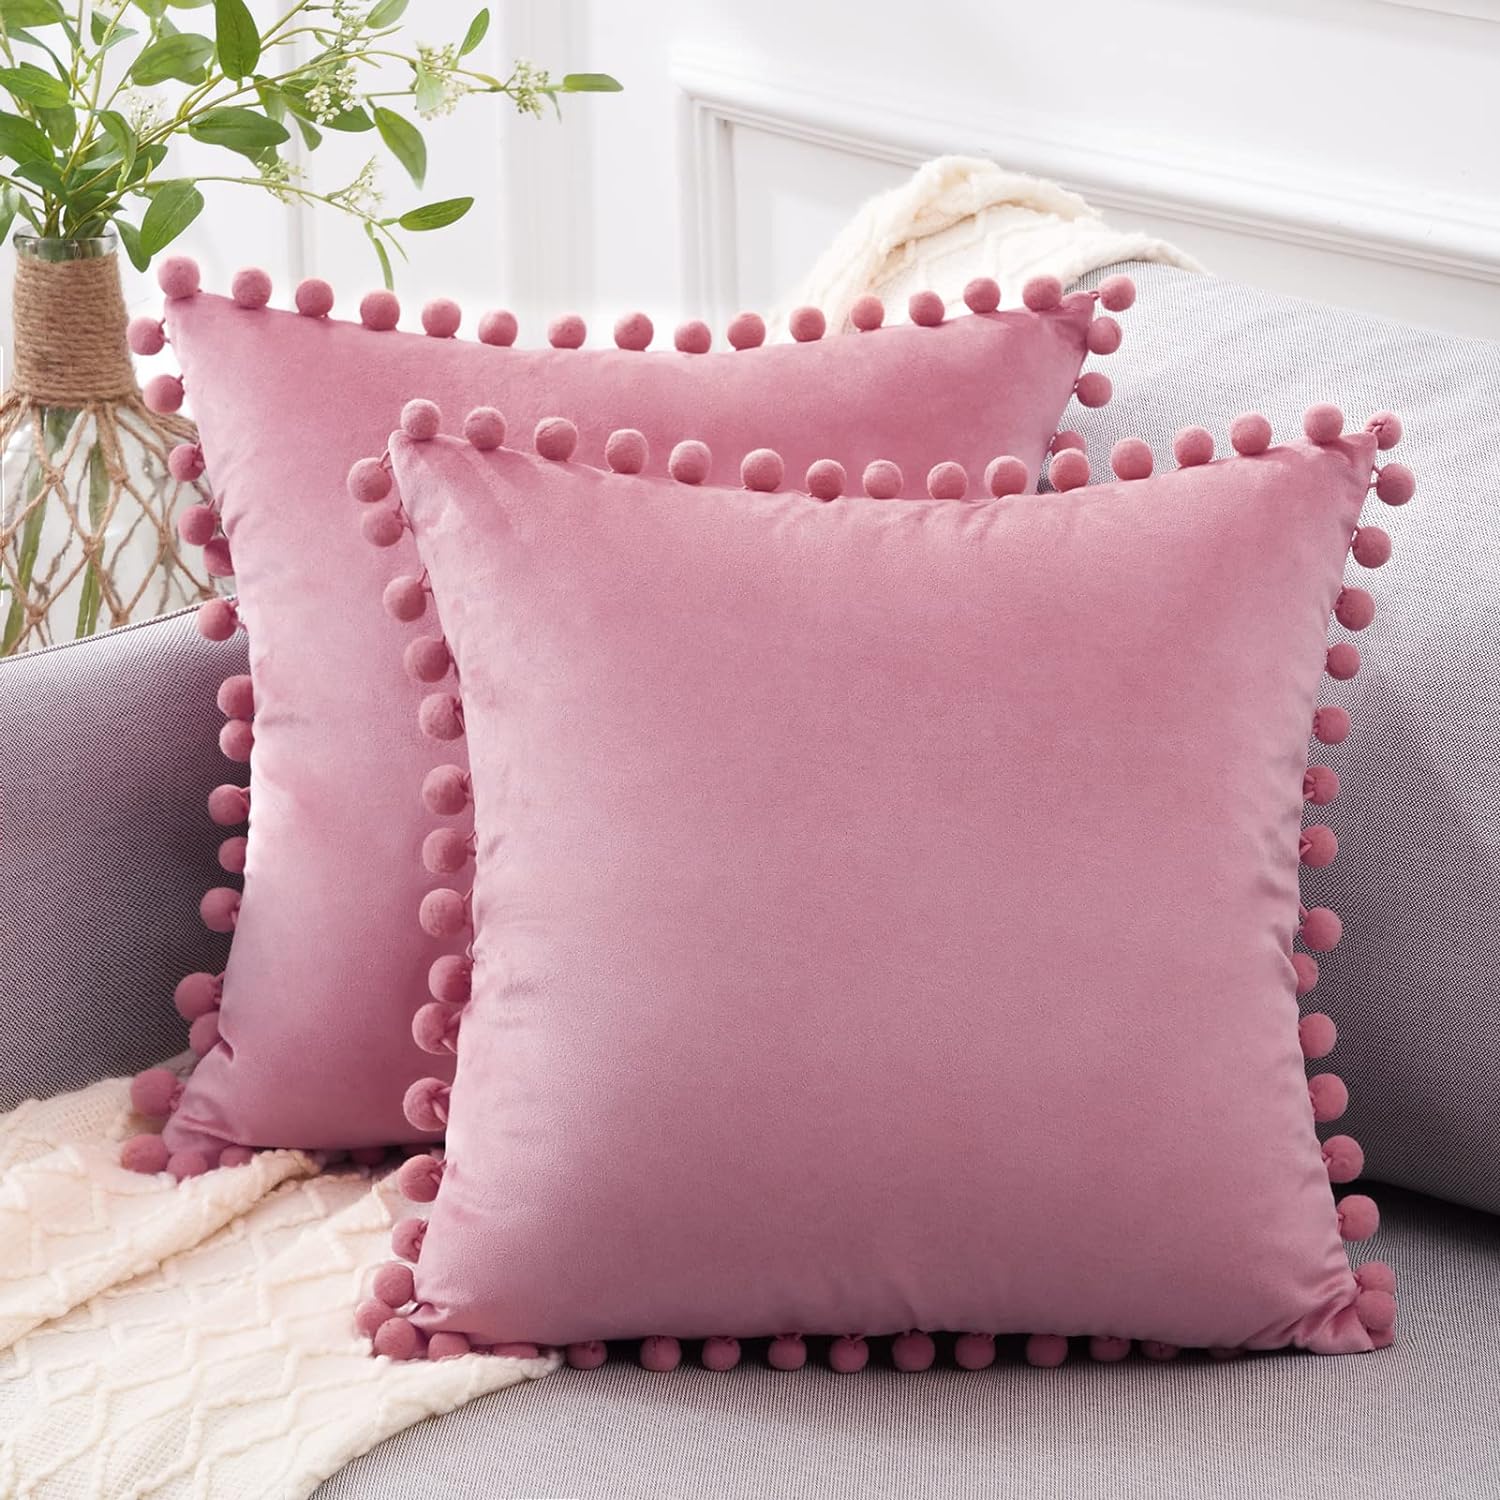  Top Finel Valentines Day Pink Decorative Throw Pillow Covers 18x18 Set of 2 Couch Pillow Covers Square Pillows Soft Velvet Cushion Covers for Bedroom Living Room Spring Cute Aesthetic Home Decor 